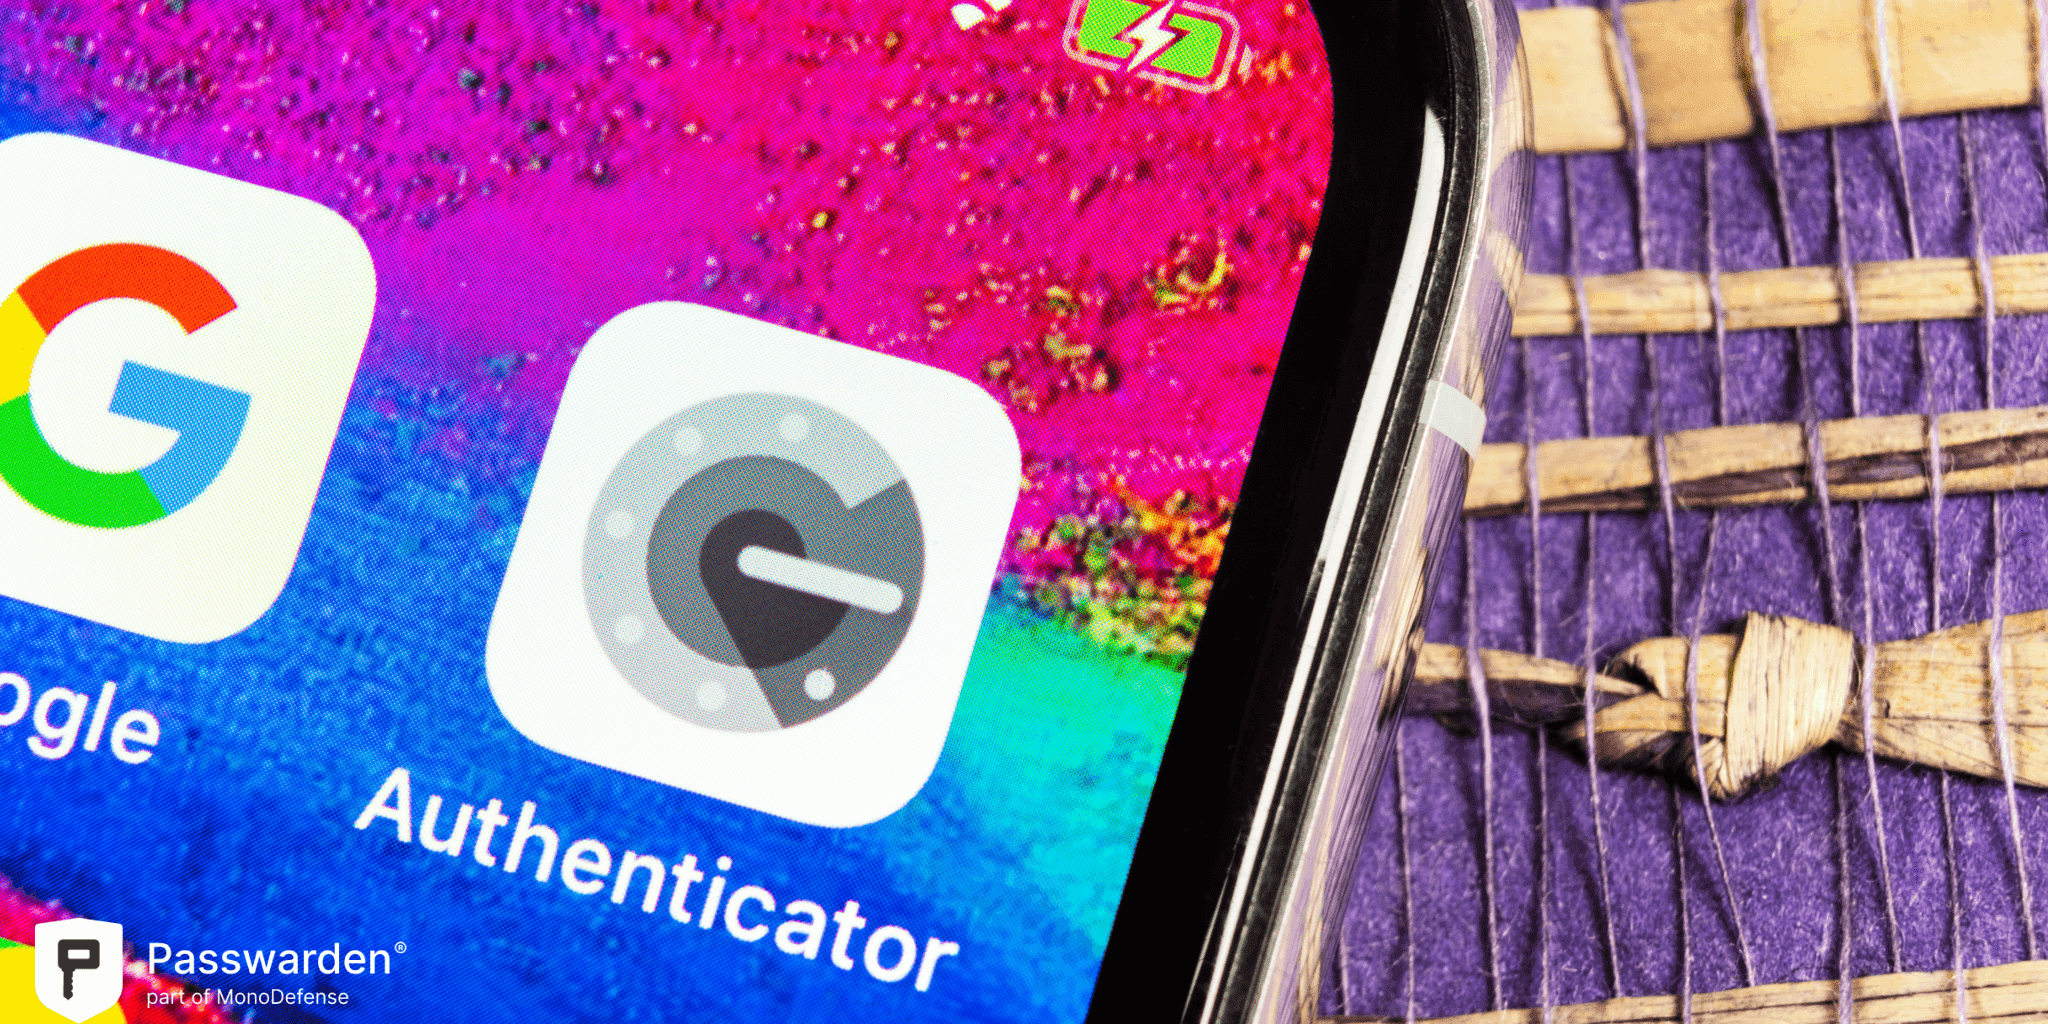 How to Transfer Google Authenticator to New iPhone